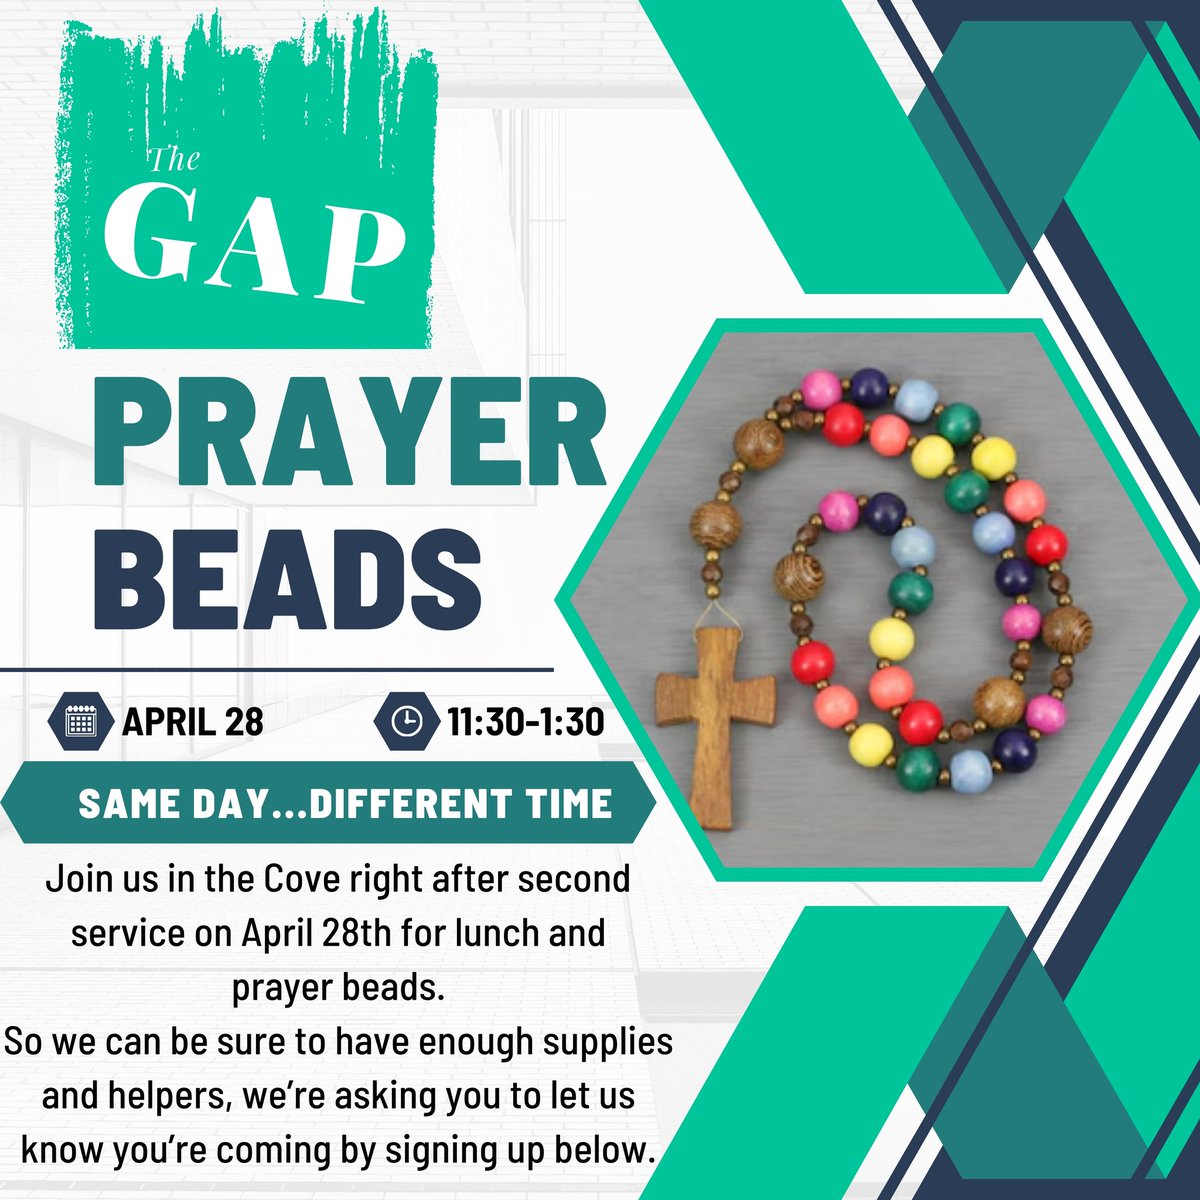 Don't forget - The Gap Prayer Beads event is happening Sunday after second service in The Cove.  See you there!  #prayerbeads #thegap

l.facebook.com/l.php?u=https%…